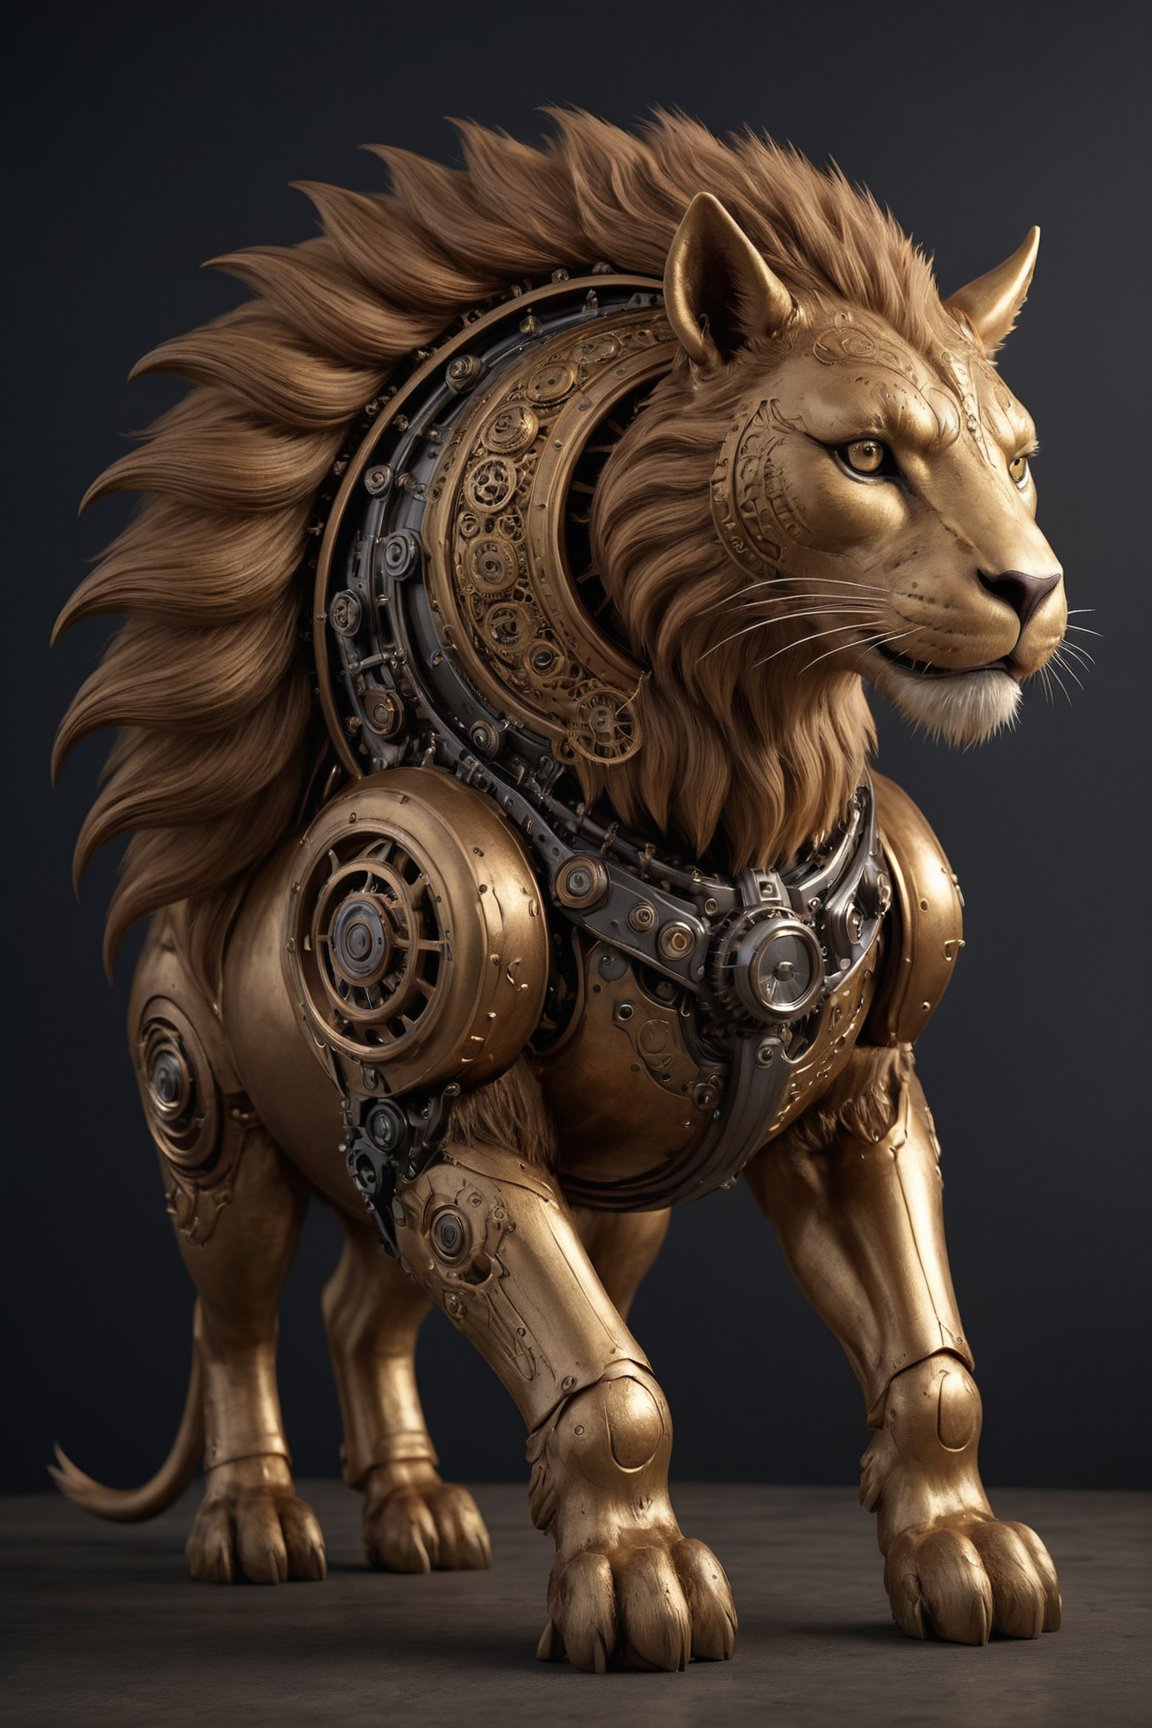 Generate hyper realistic image of a colossal mechanical chimera, blending the features of a lion, goat, and serpent with steampunk-inspired gears and machinery. Its imposing form and metallic roar signify a fusion of monstrous and industrial elements.more detail XL,more detail XL,
